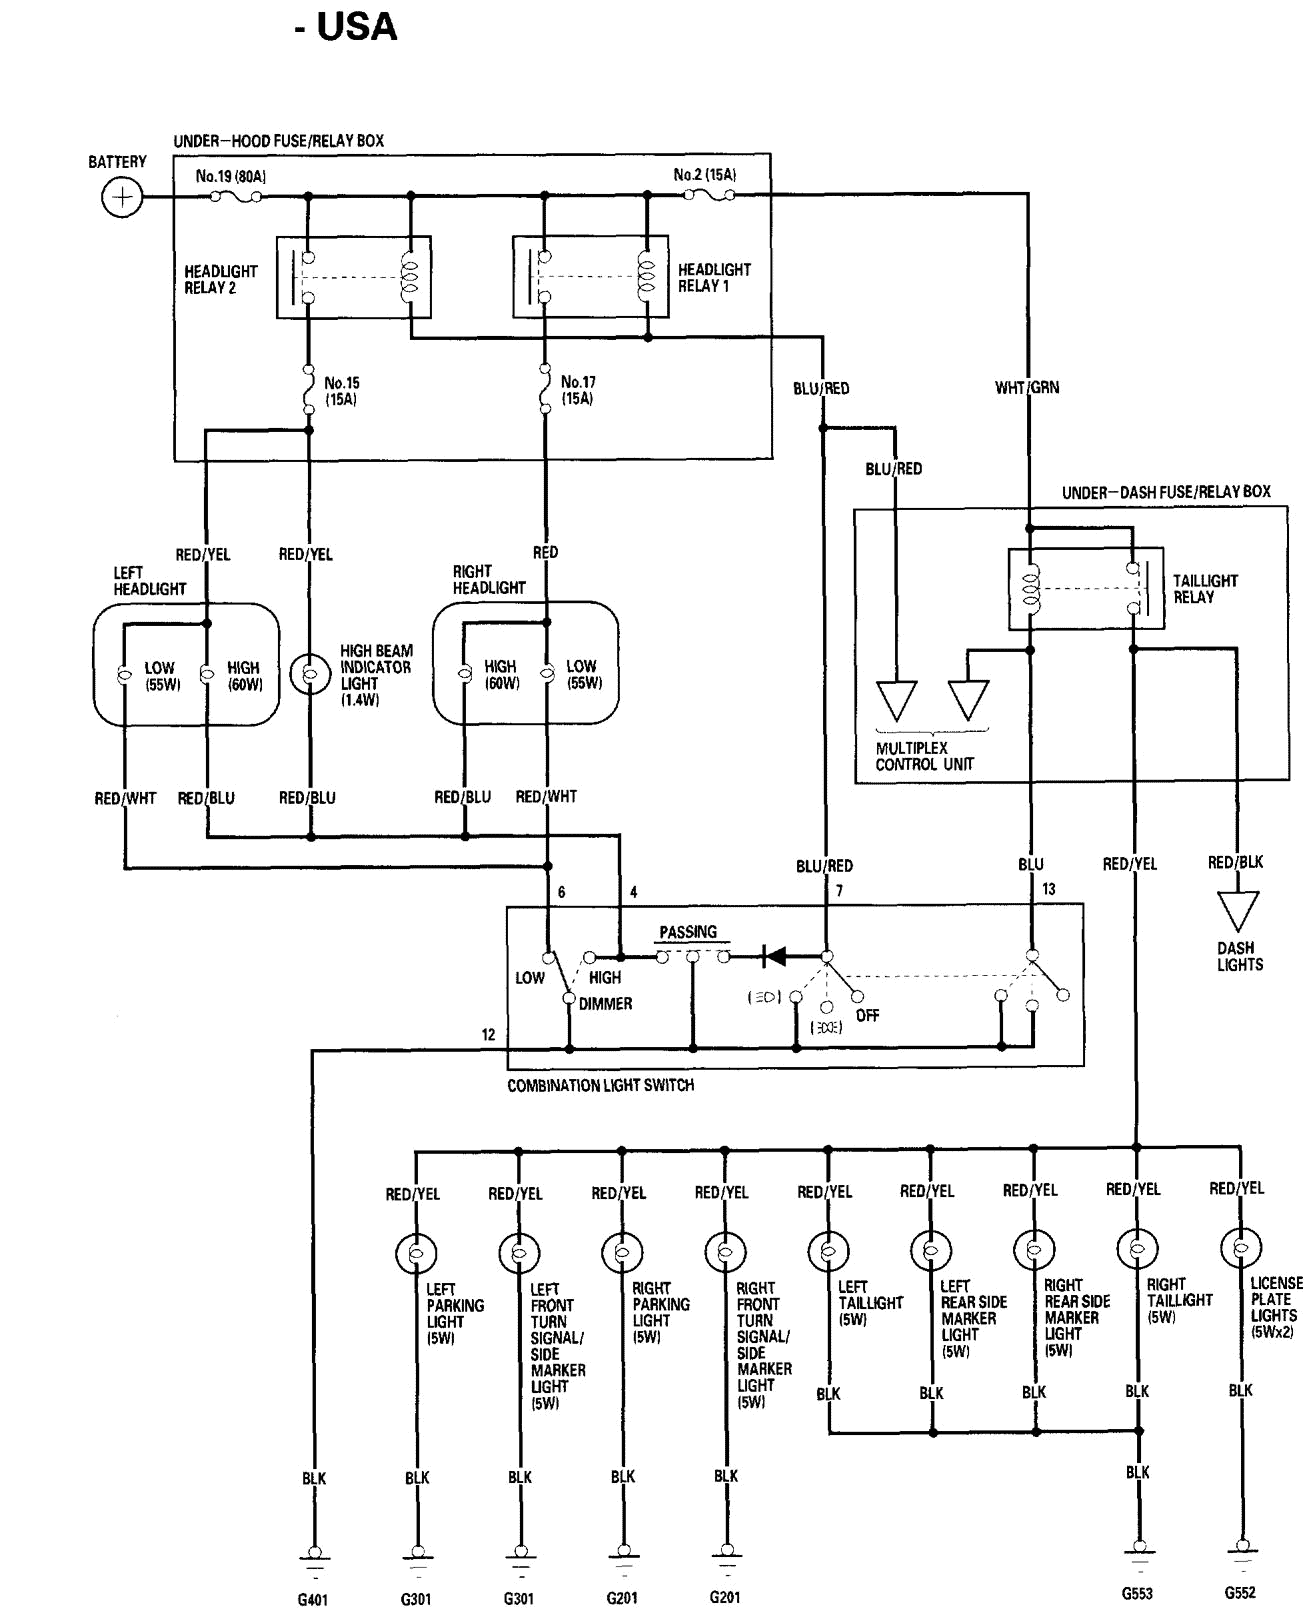 2003 Honda Civic Dimmer Switch Wiring Diagram from www.freeautomechanic.com